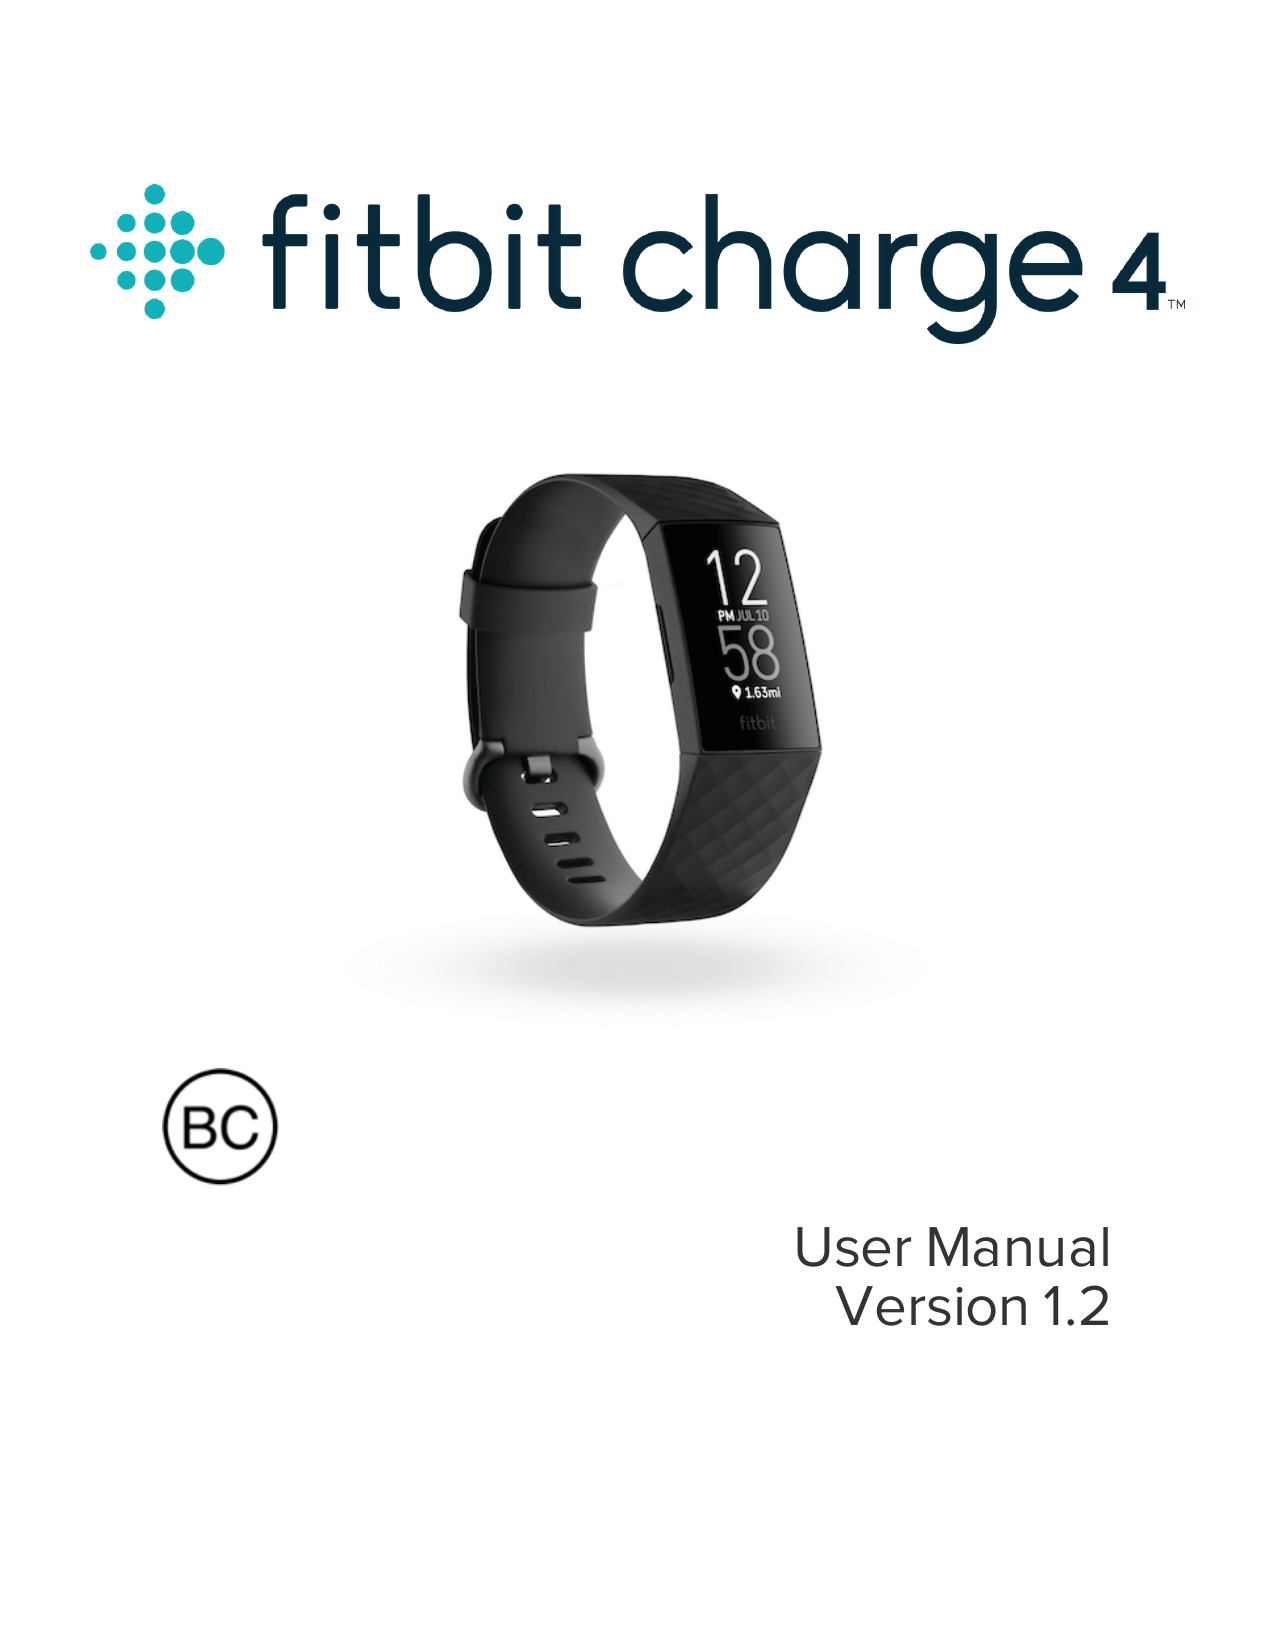 Charge 4 Advanced Fitness Tracker